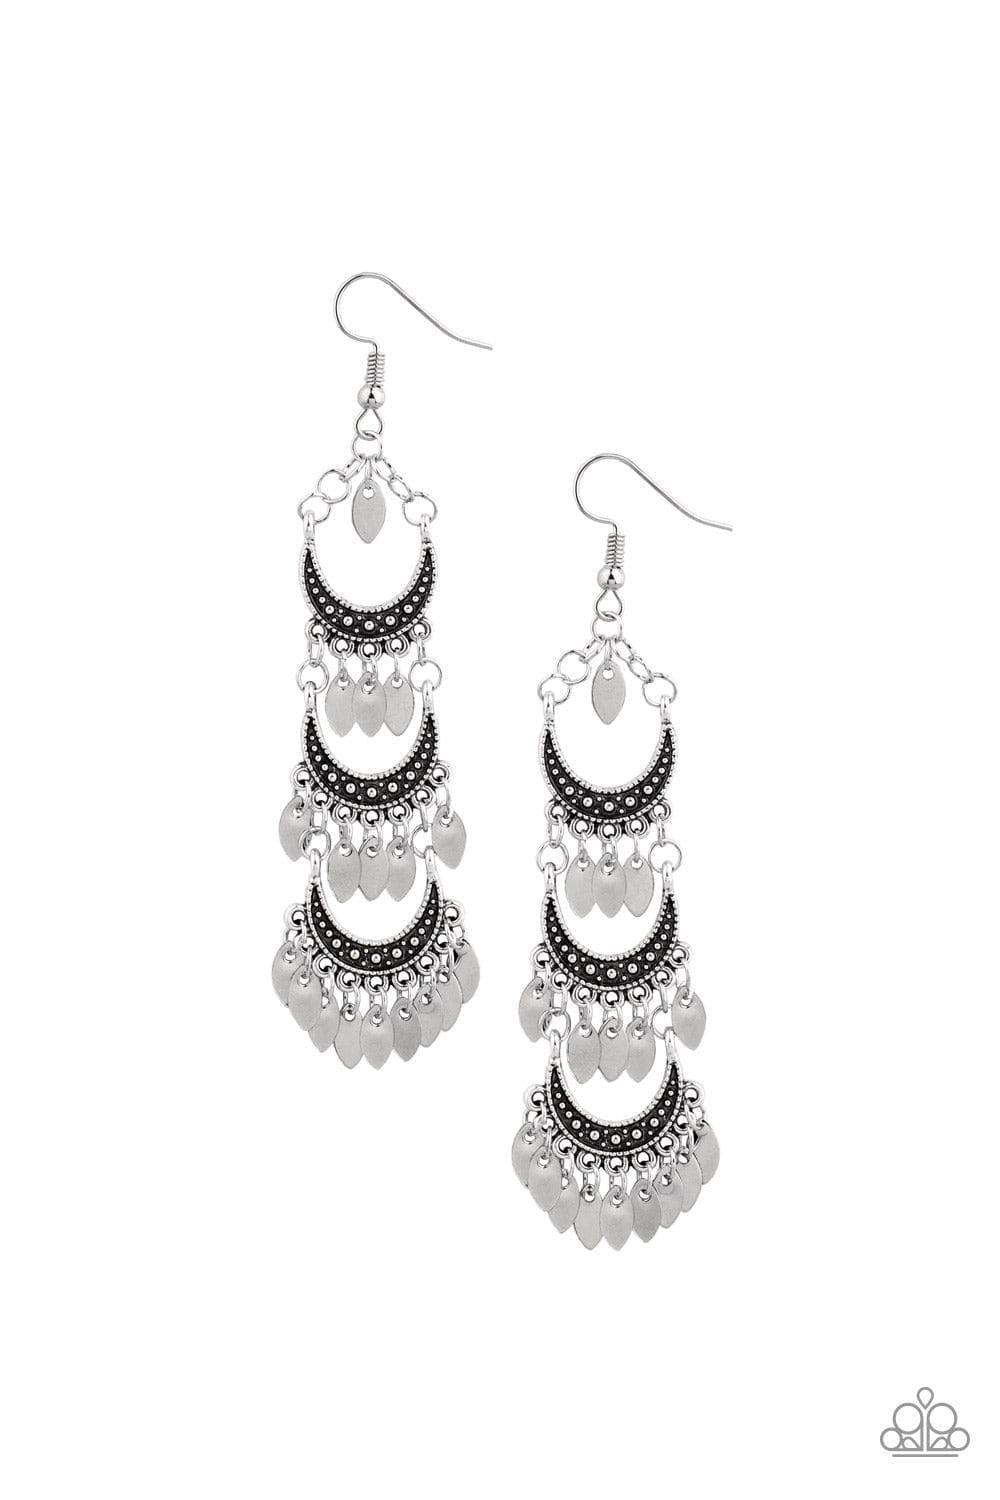 Paparazzi Accessories - Take Your Chime - Silver Earrings - Bling by JessieK